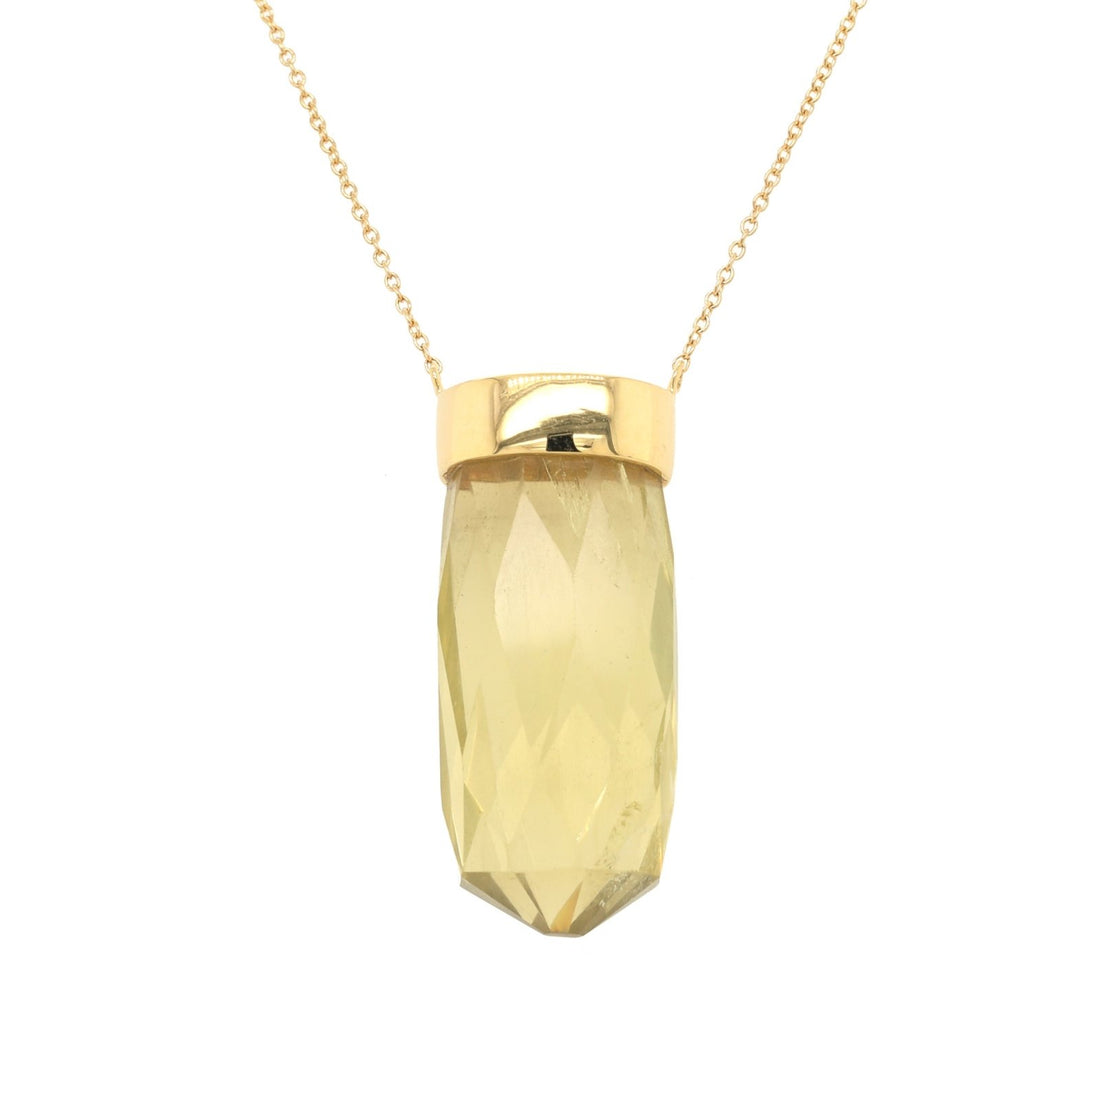 One of a Kind Citrine Point Necklace - Ele Keats Jewelry